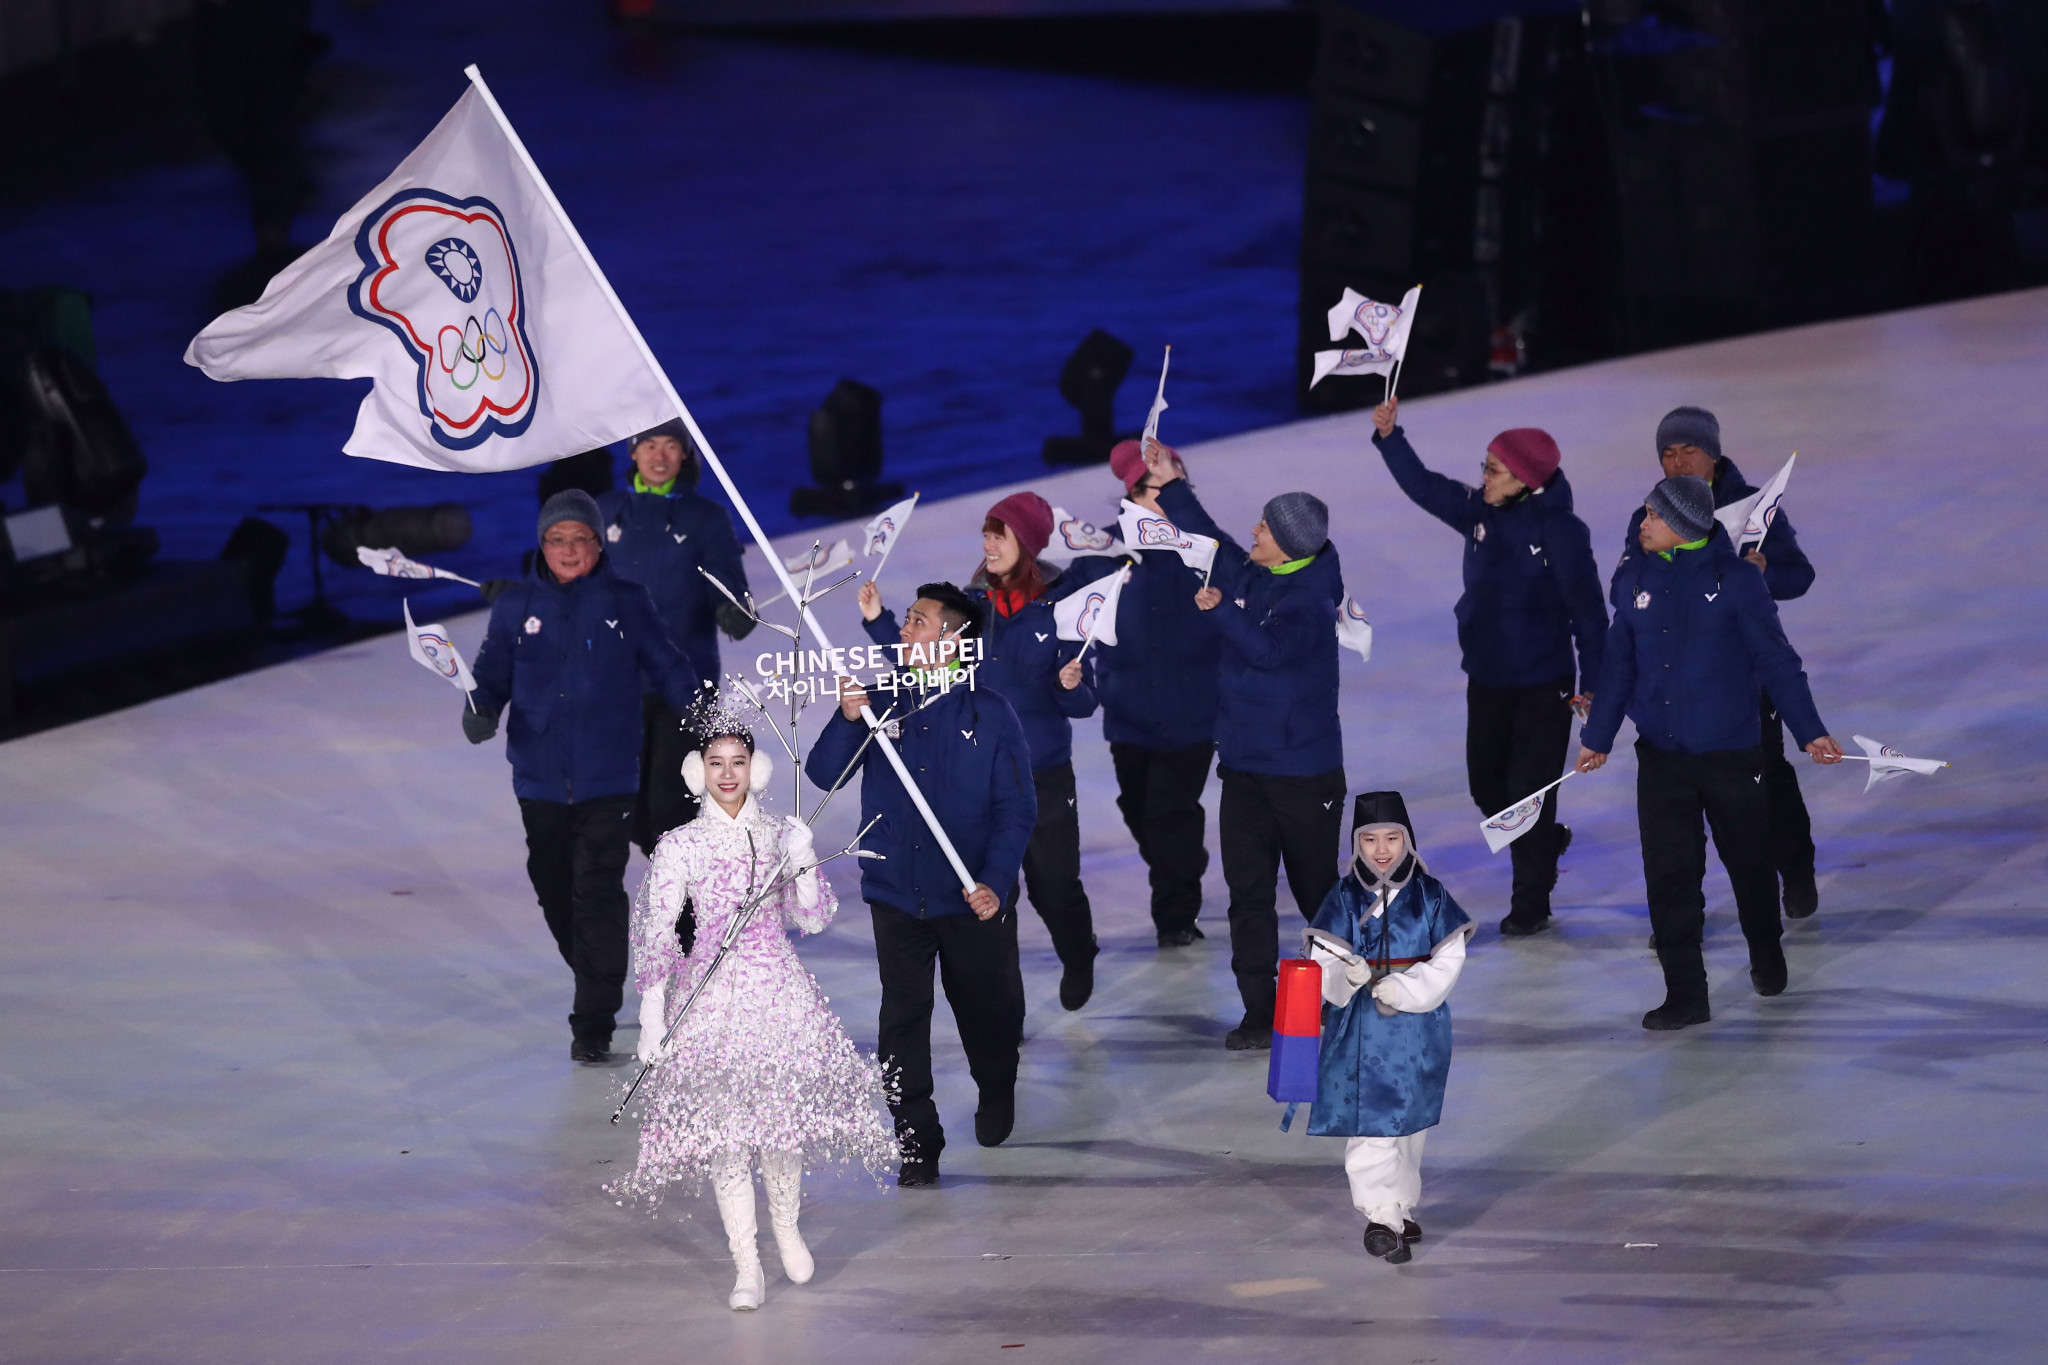 Chinese Taipei have been told by the IOC that they must take part in the Opening Ceremony at Beijing 2022, despite fears it will be used for propaganda by China ©Getty Images